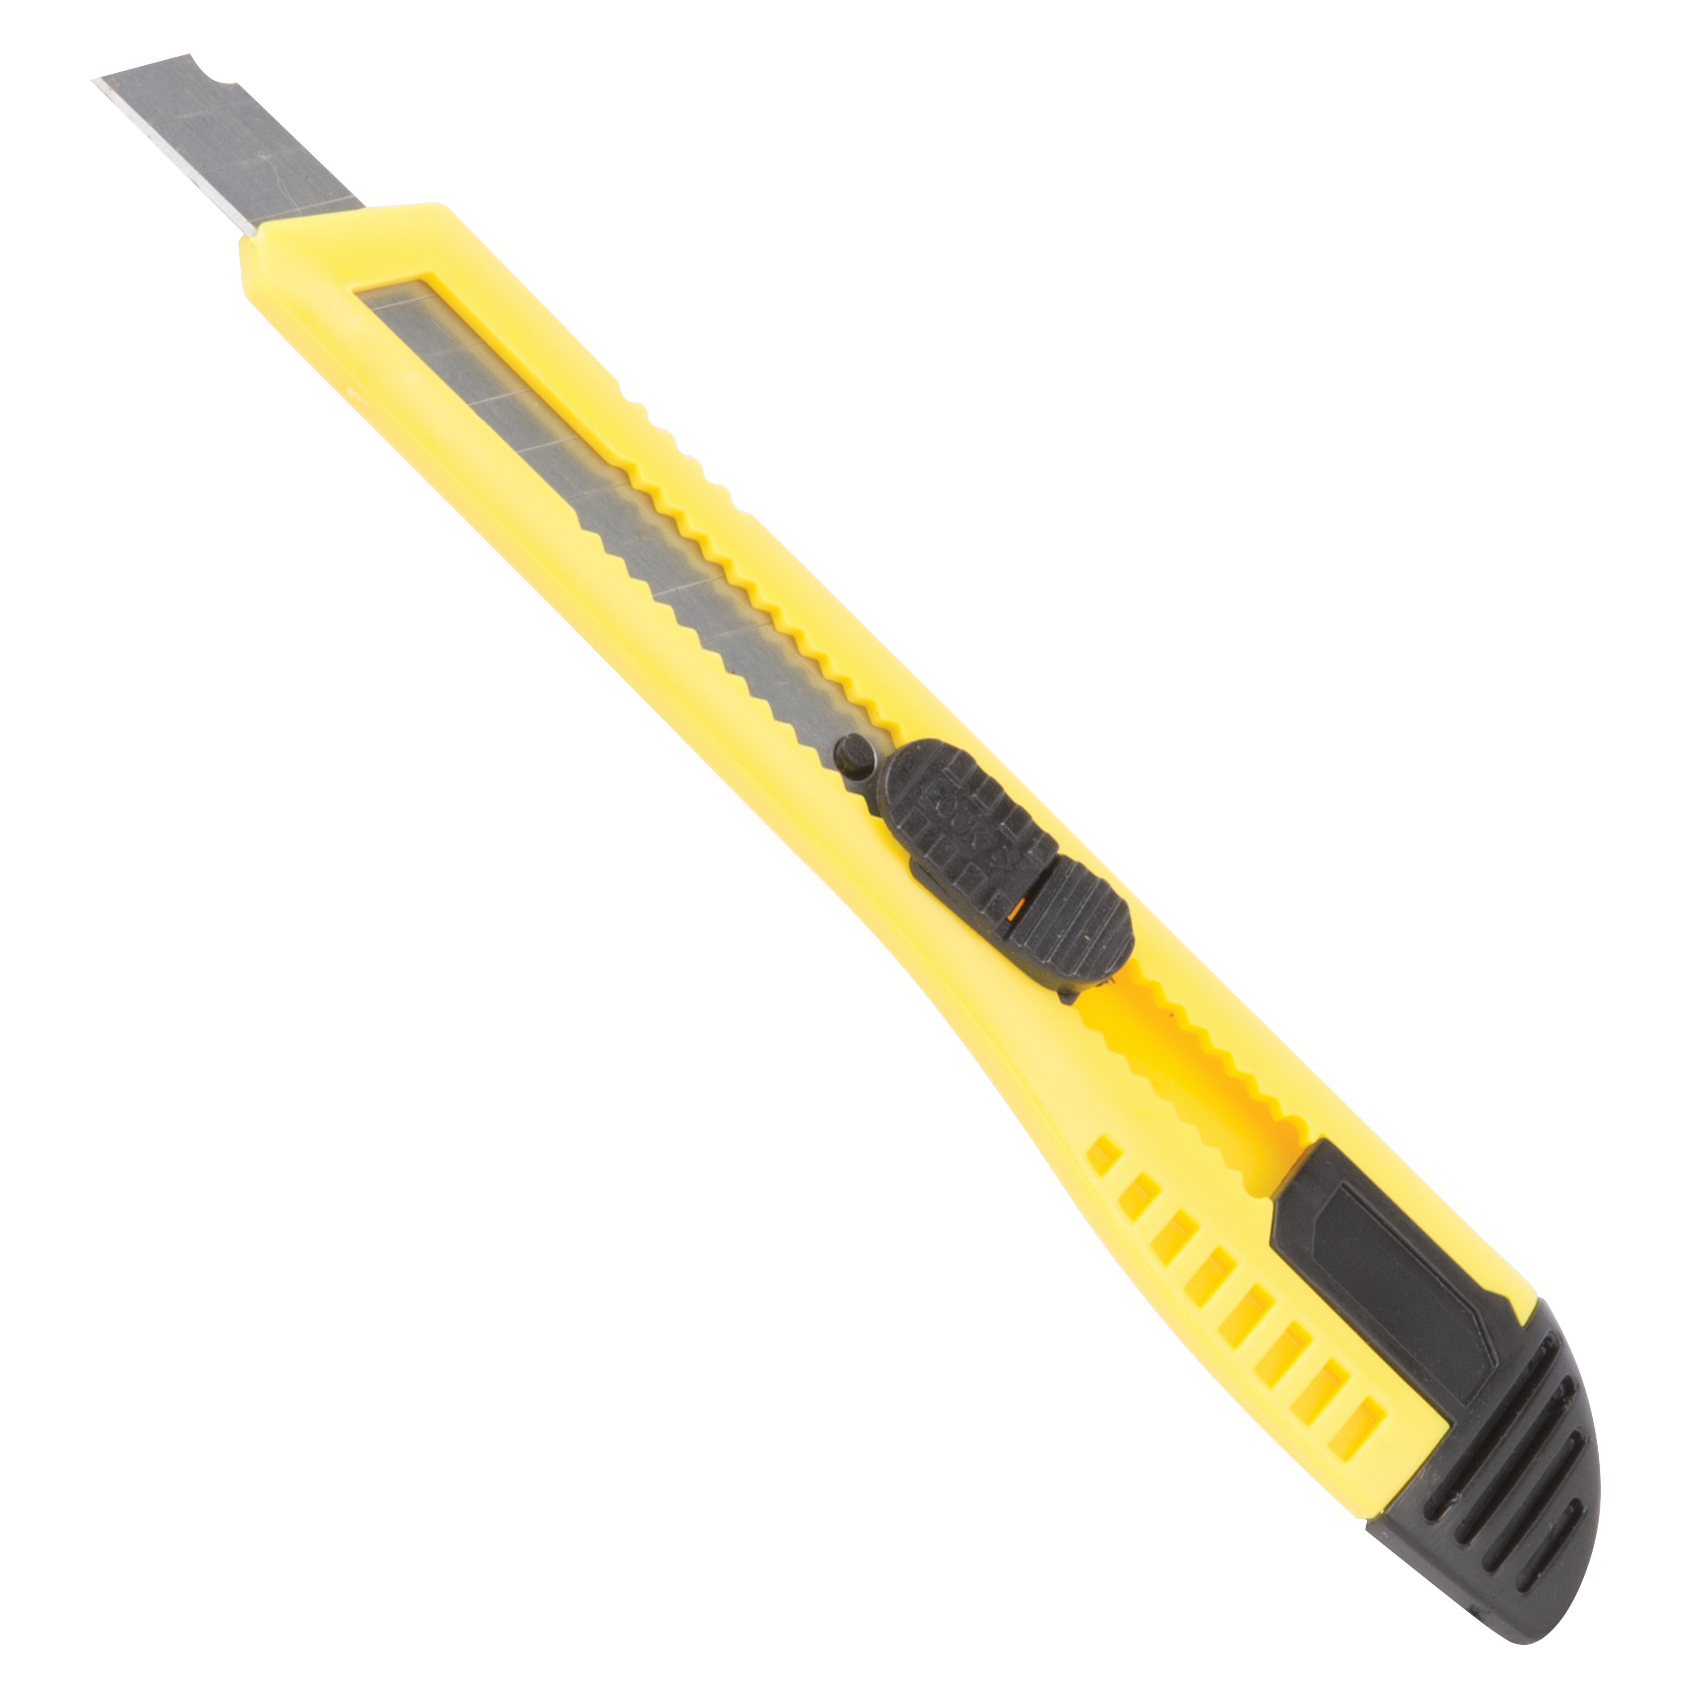 TGE-SK11 Utility Knife, 3-1/4 in L Blade, 9 mm W Blade, Carbon Steel Blade, Ergonomic Grip Handle, Yellow Handle